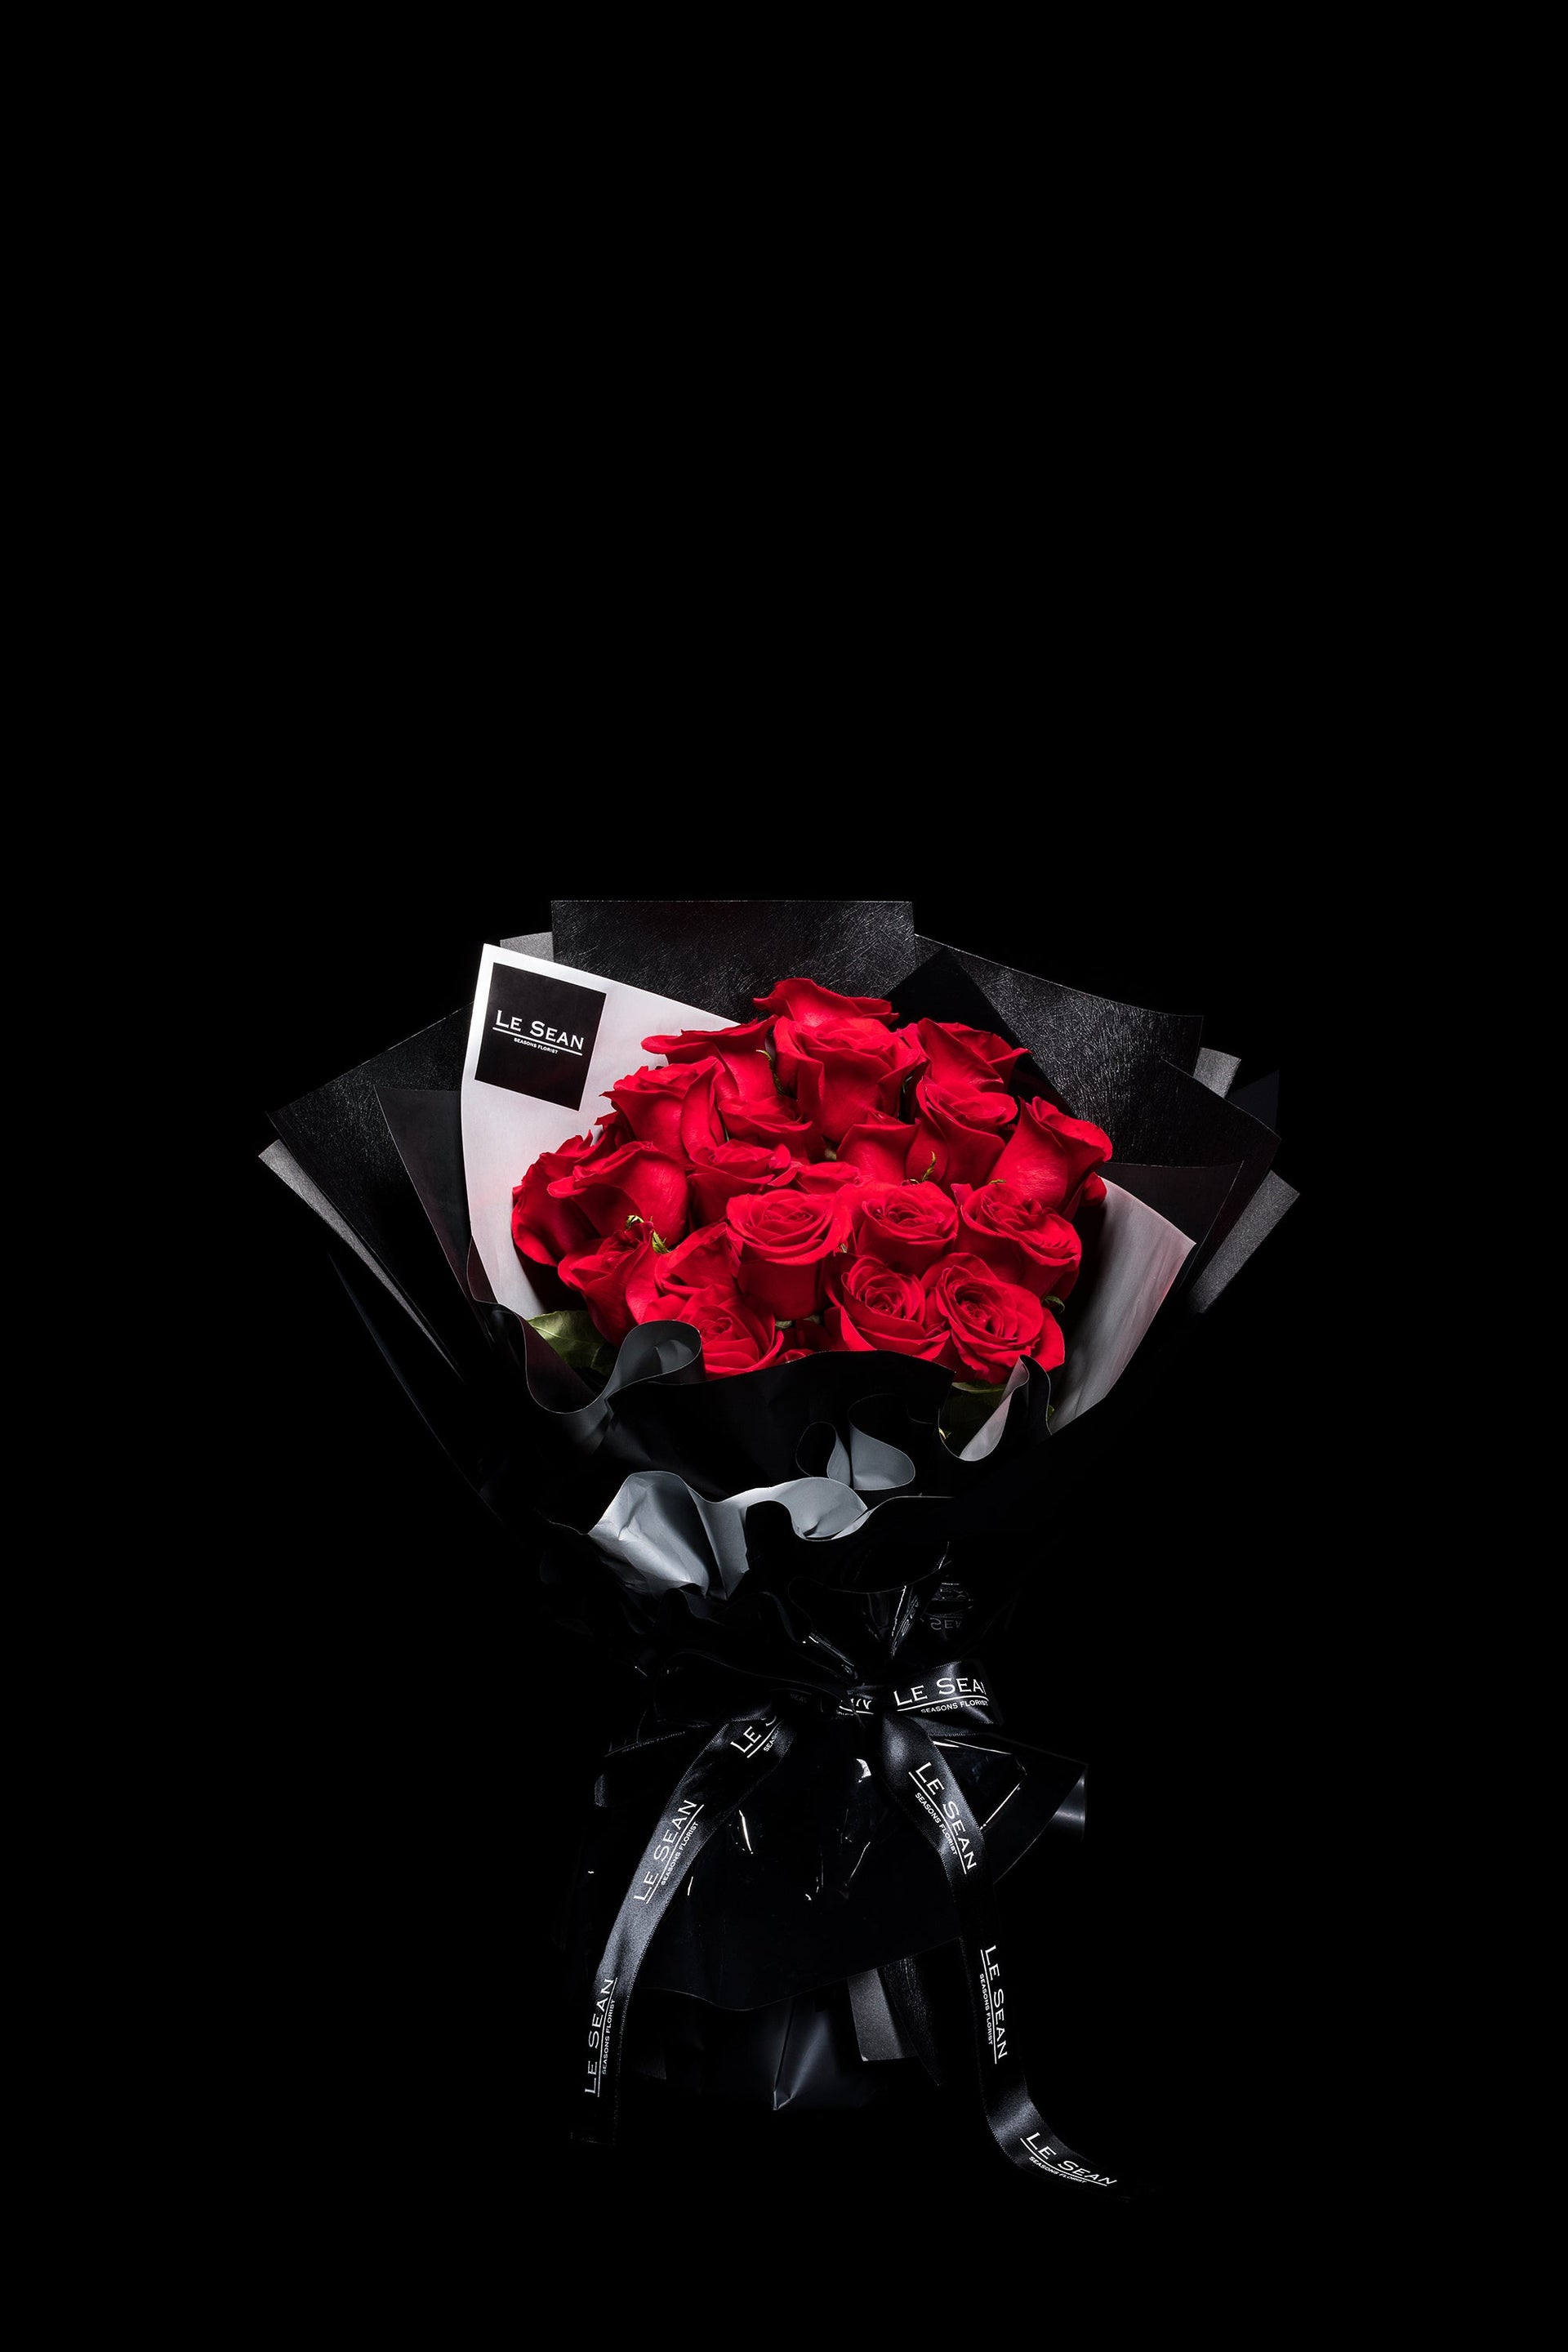 Fresh Royal Roses - The New Signature Series Valentine’s Day